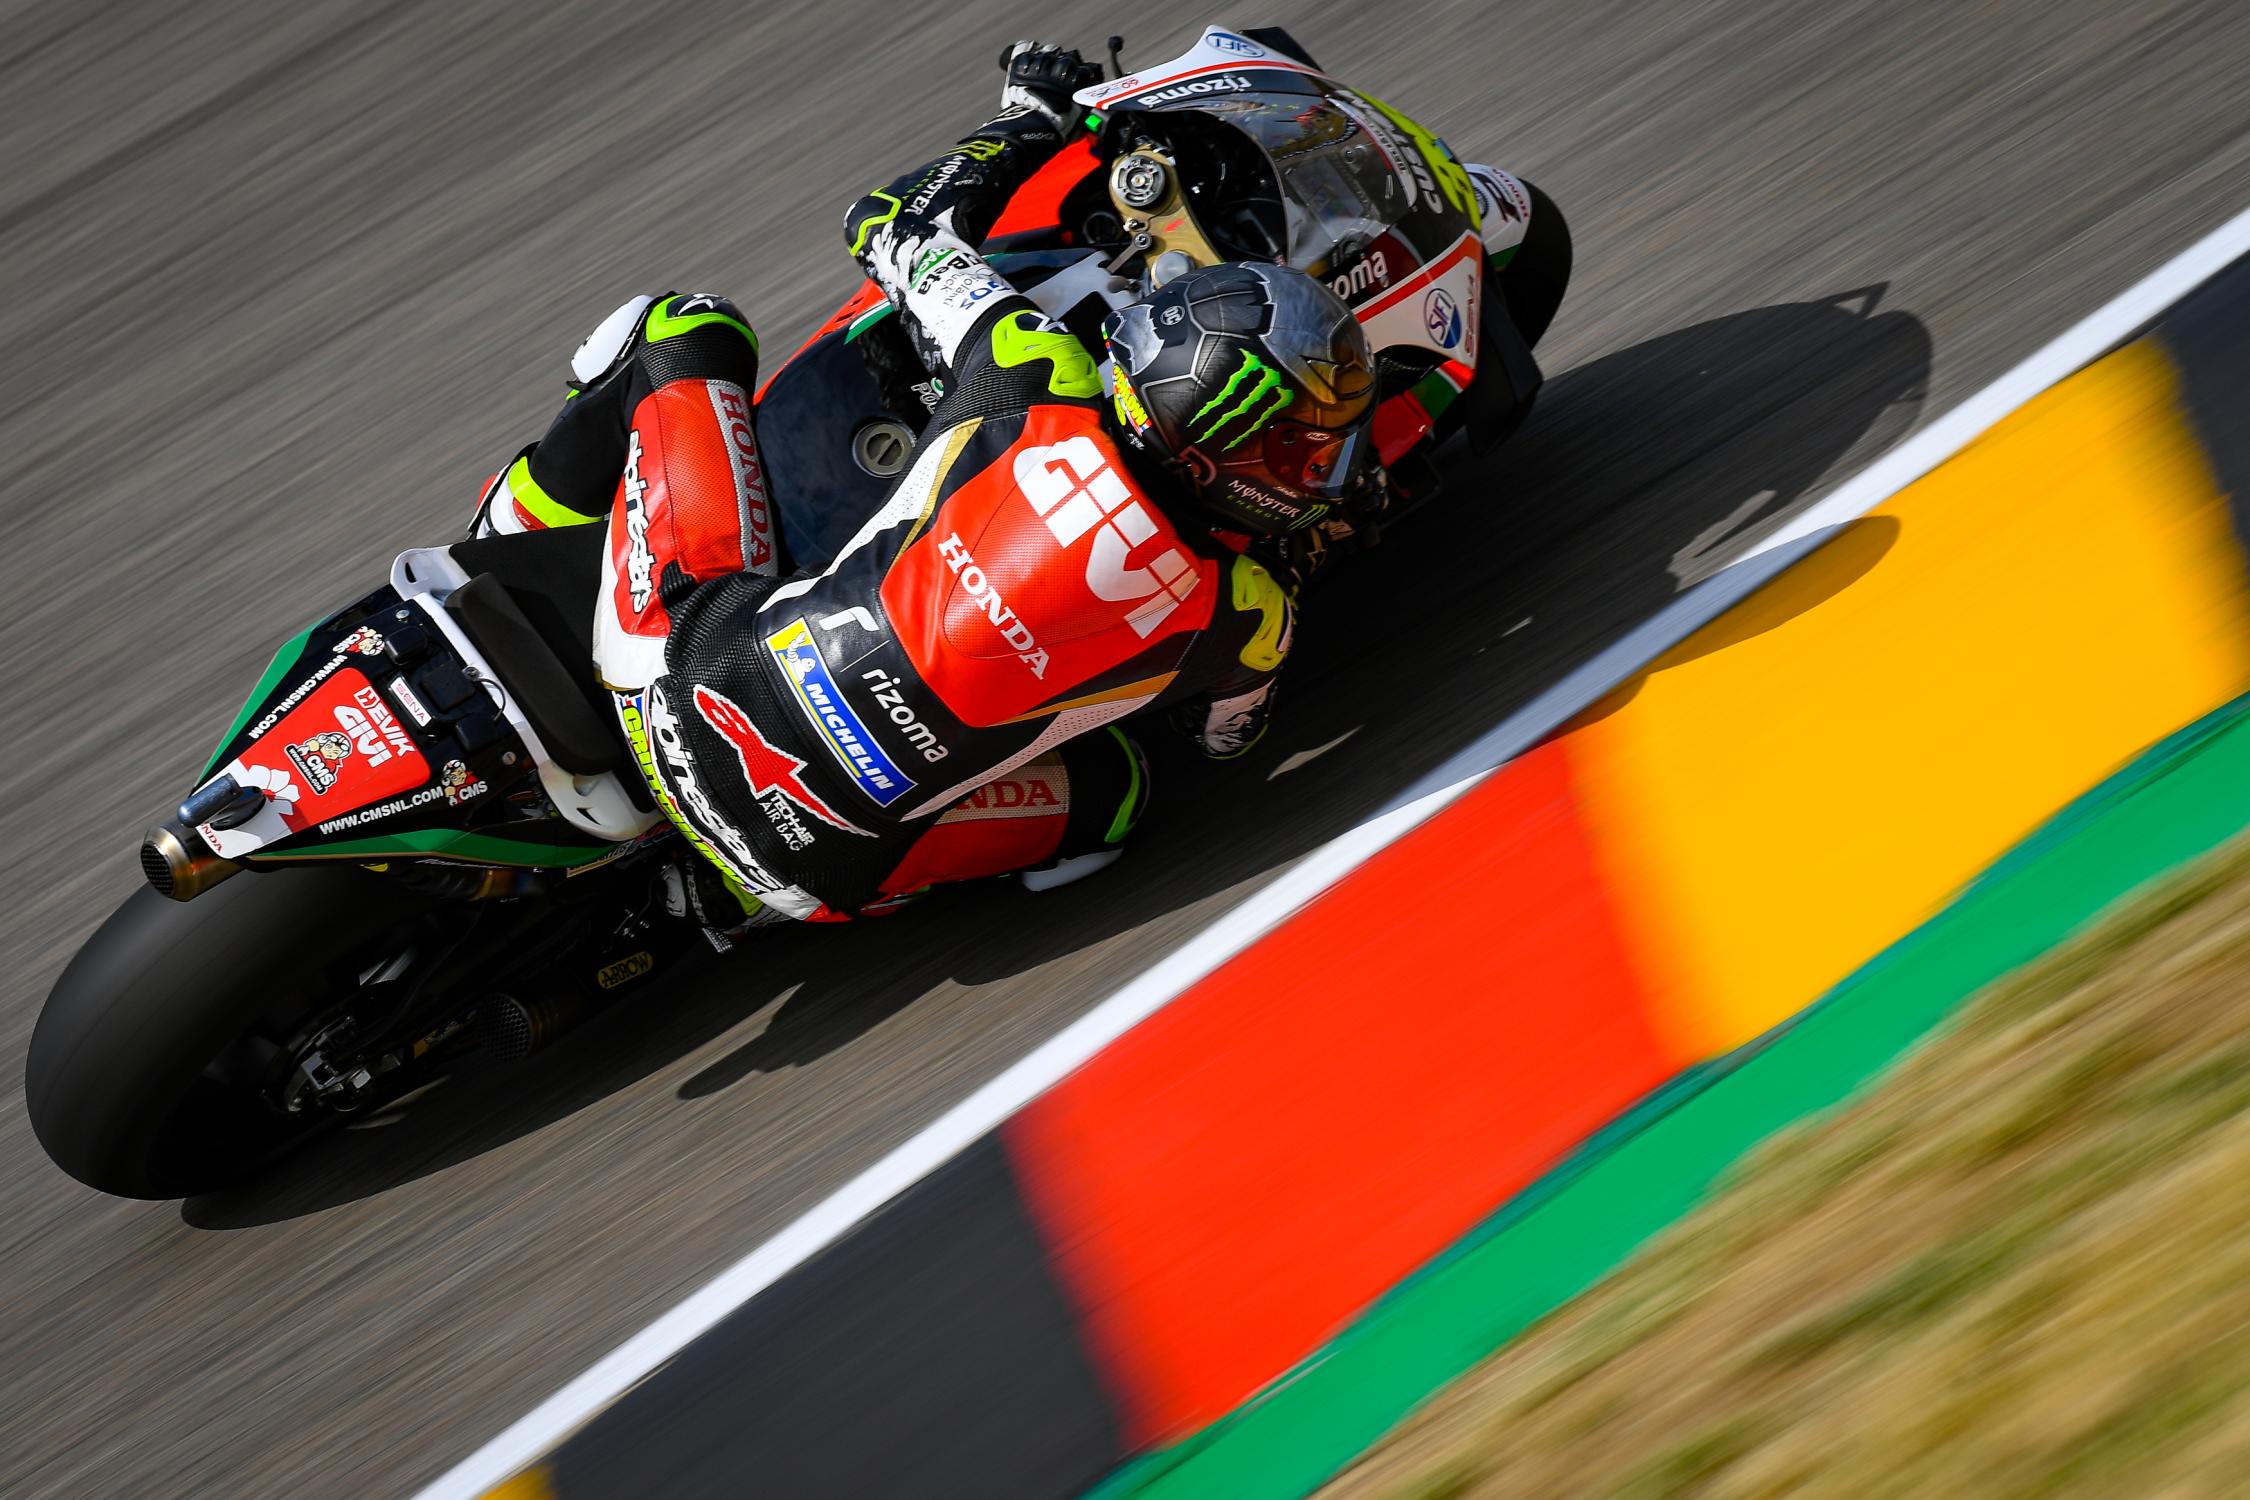 CRUTCHLOW IN GOOD SHAPE FOR SACHSENRING RACE